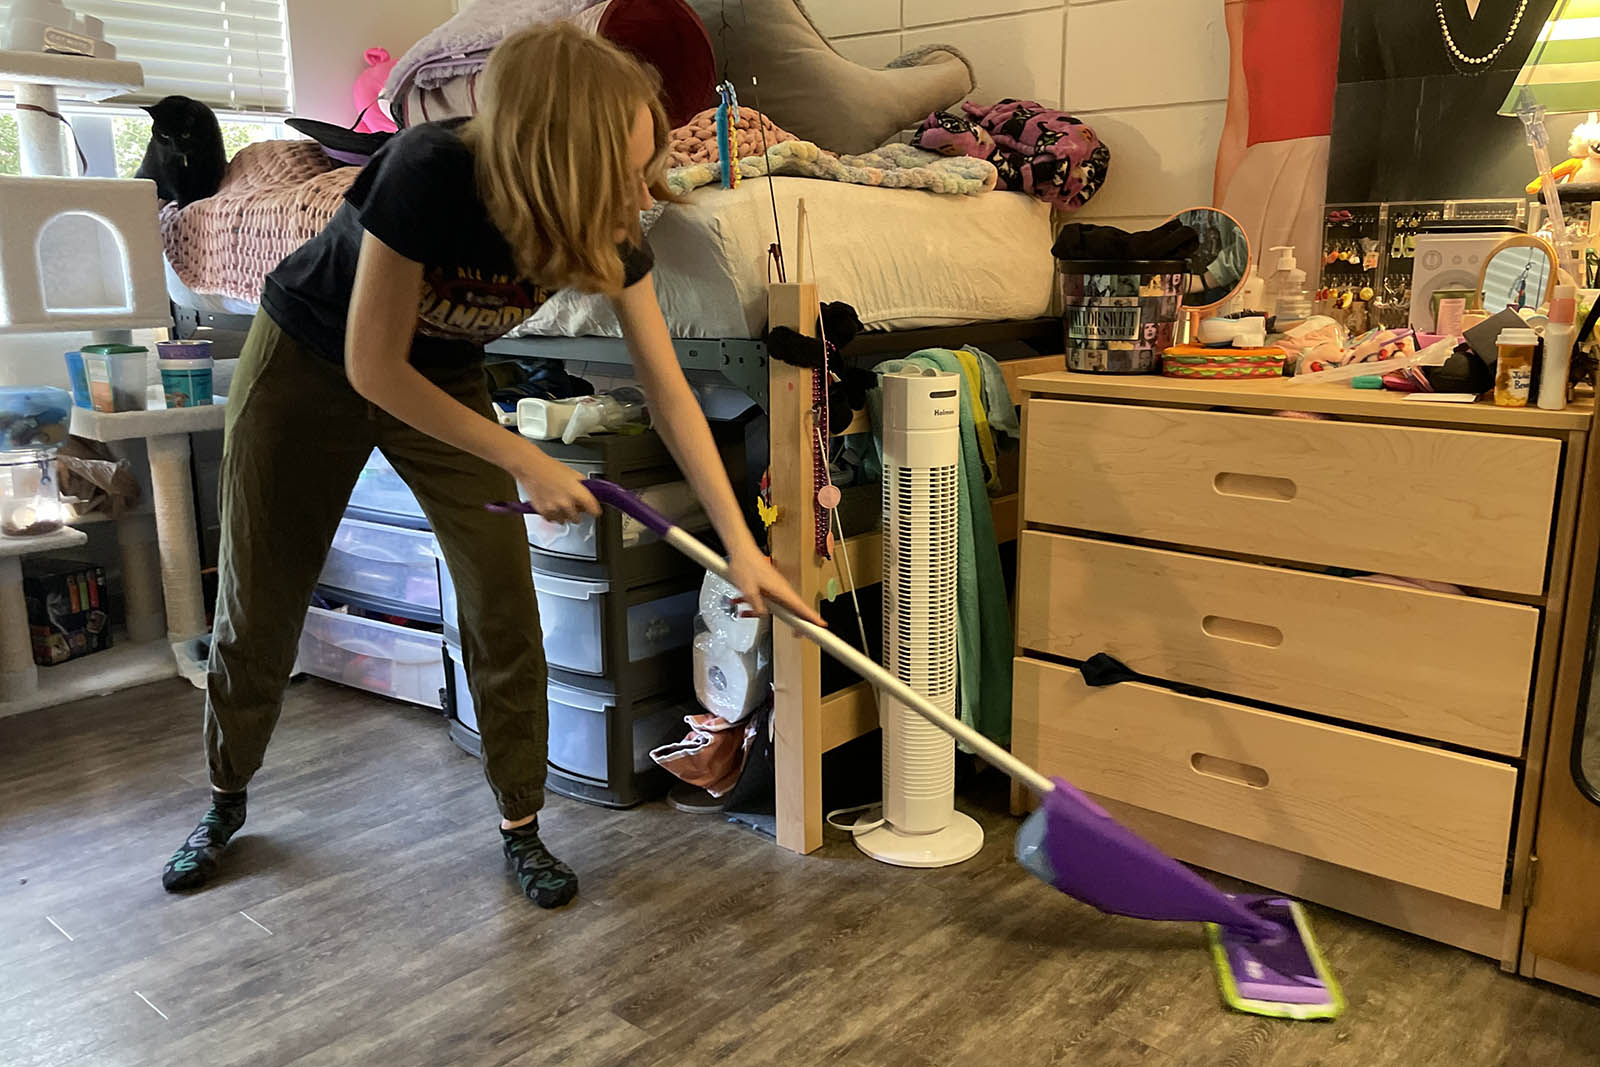 Student uses mop to clean the floor of a dorm room